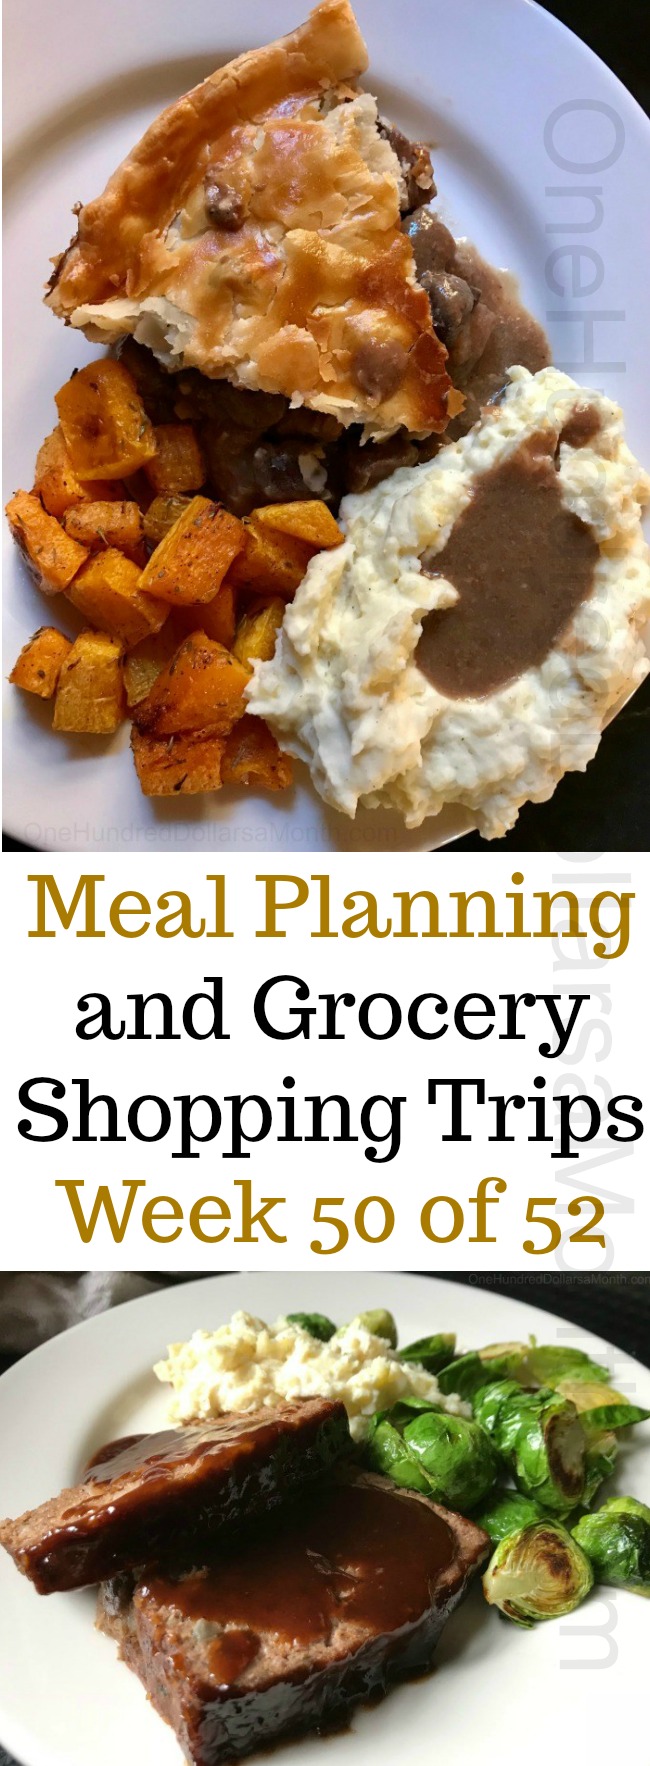 Meal Planning and Grocery Shopping Trips – Week 50 of 52